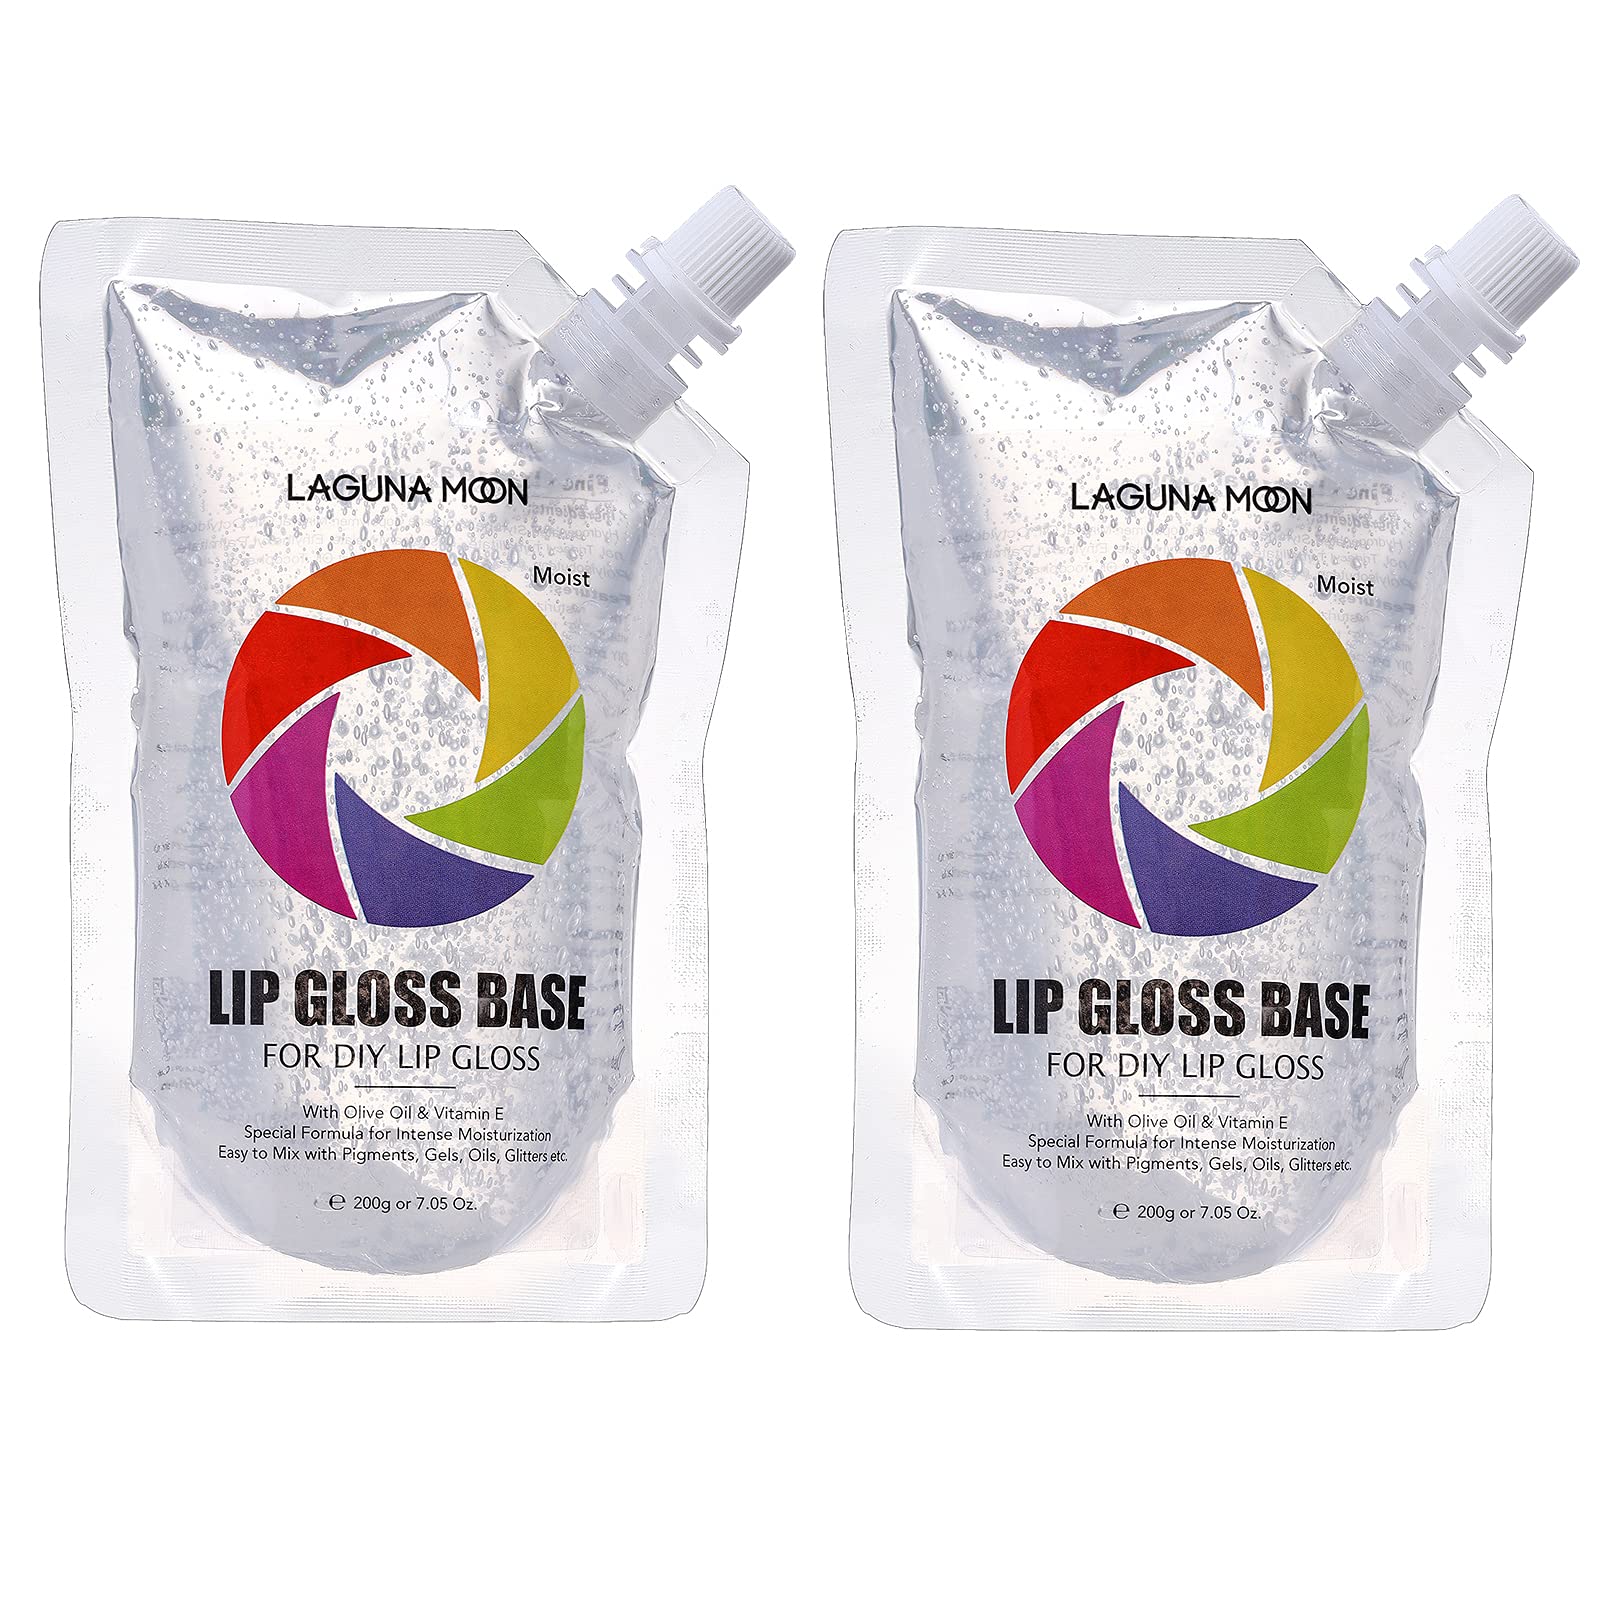 Clear Lip Gloss Base for DIY Lip Gloss Making Kit - 14.1oz Versagel with  Olive Oil & Vitamin E for Smooth Hydrated Moisturized Lips - Fragrance-Free  Safe for Sensitive Skin Small Business